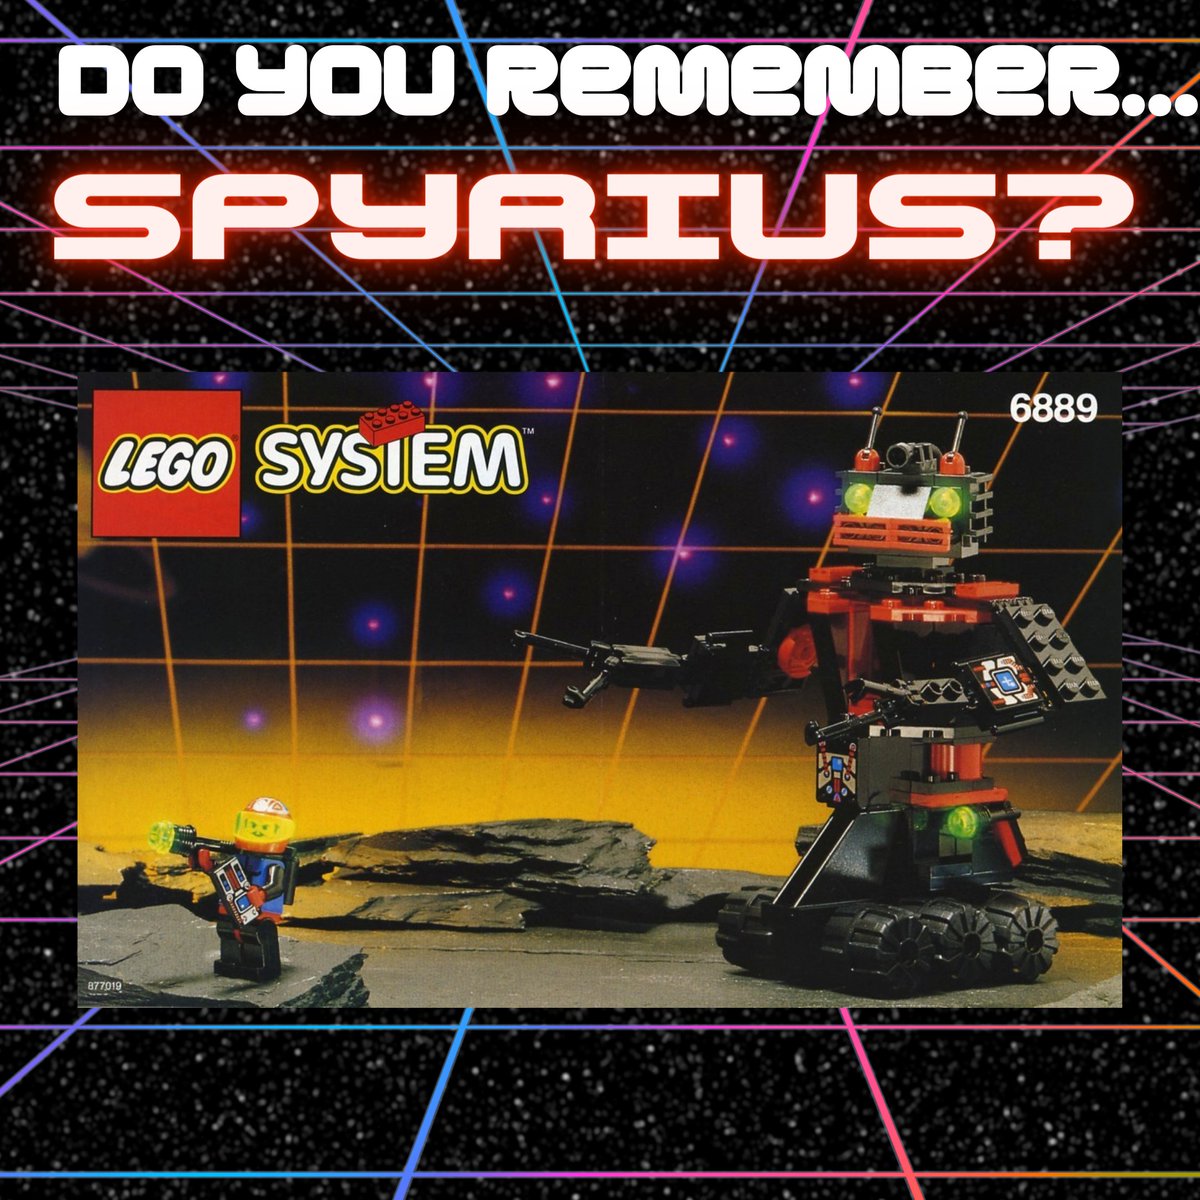 #LEGO Spyrius is the perfect throwback theme for a Saturday. Their mission? Steal technology from other #LEGOSpace factions and guard it on their planet! Perhaps the most notable character here is 'Major Kartofski', the first robot made as a traditional minifigure. #AFOL #AFOLs